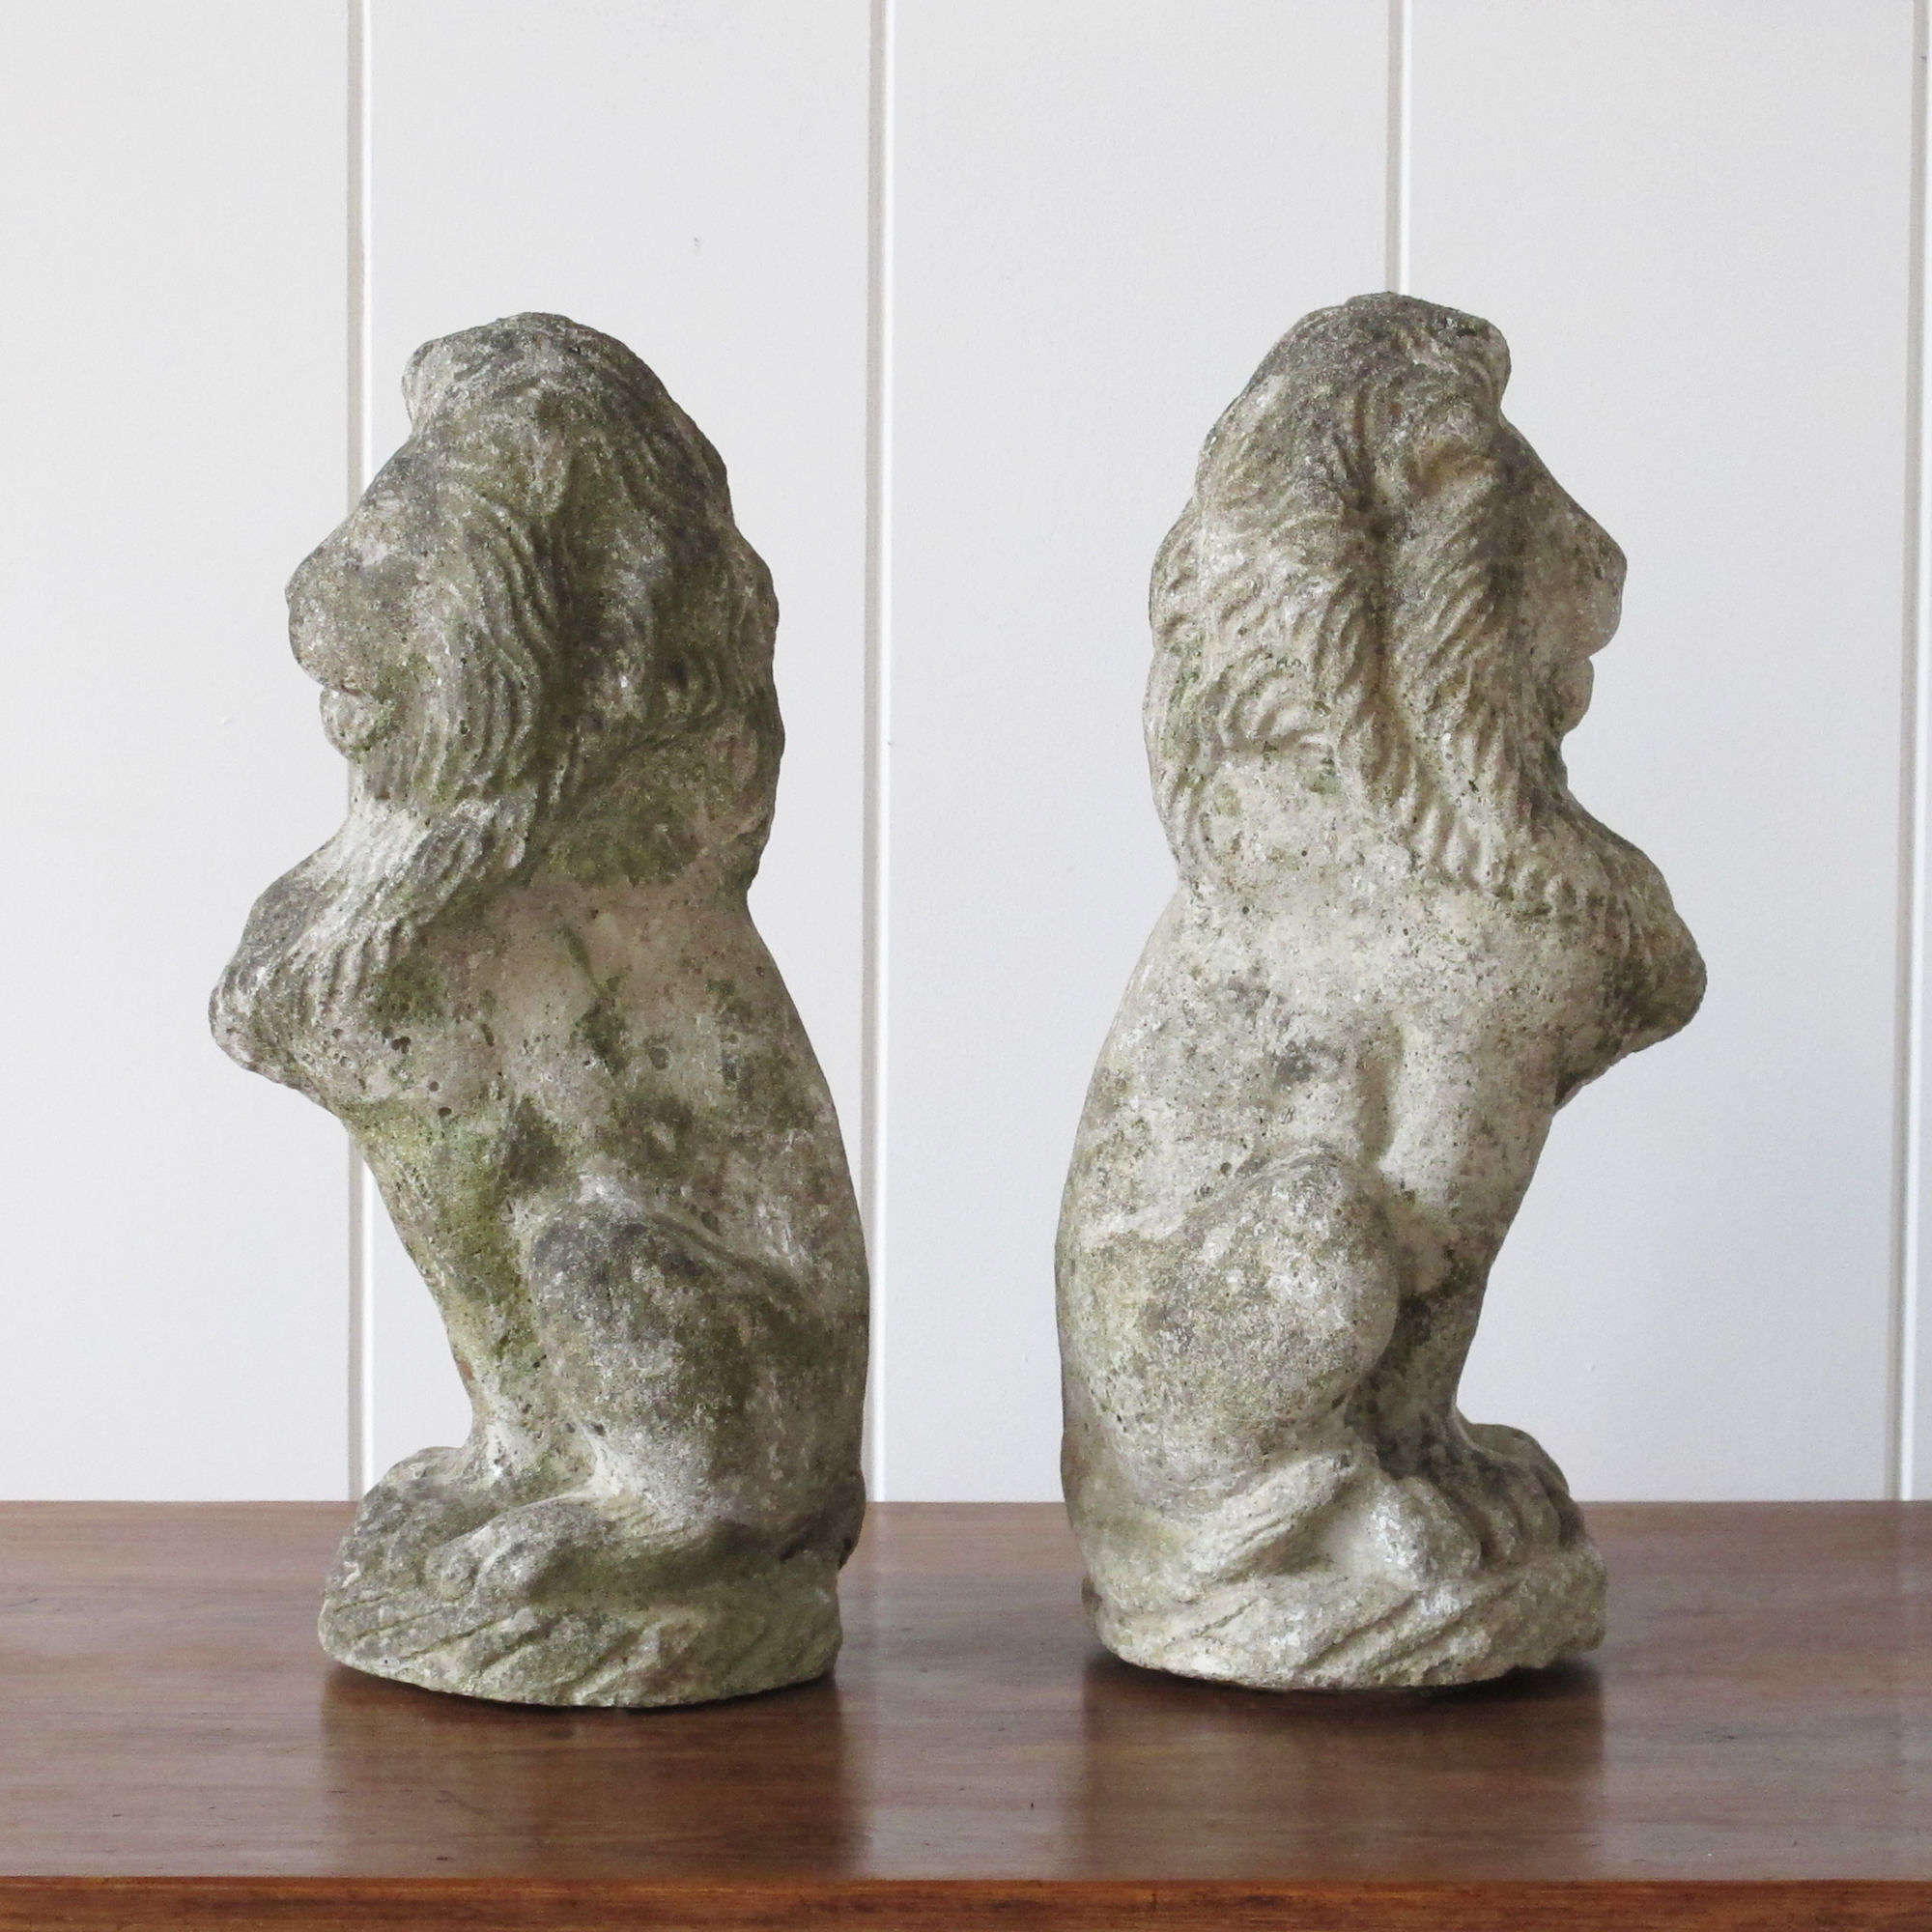 Charming Small Weathered Lions.